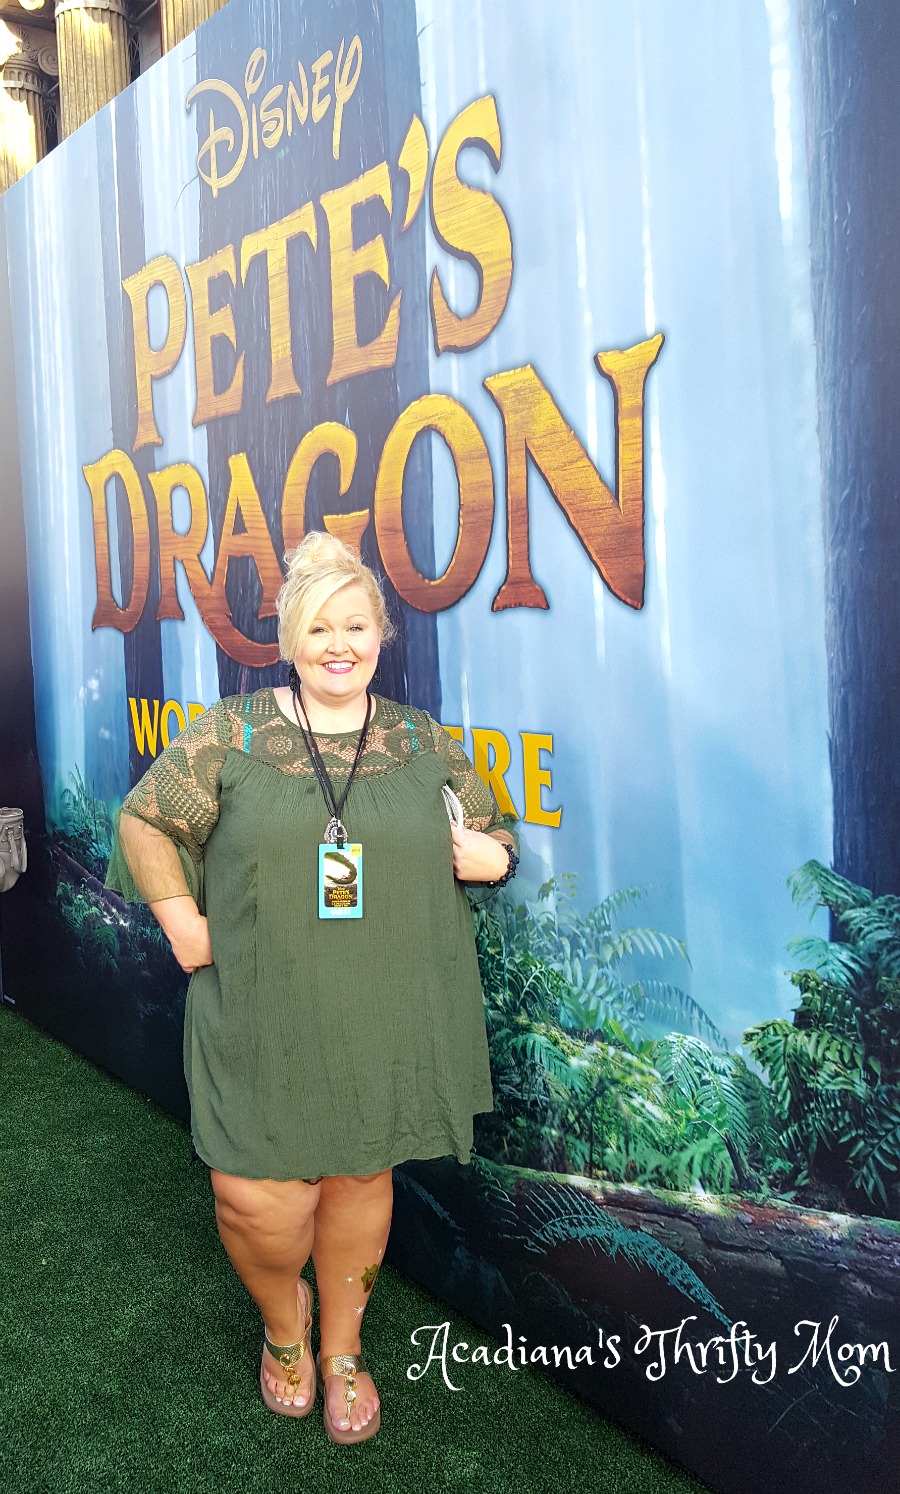 My Amazing Pete's Dragon Red Carpet Premier Experience #PetesDragonEvent